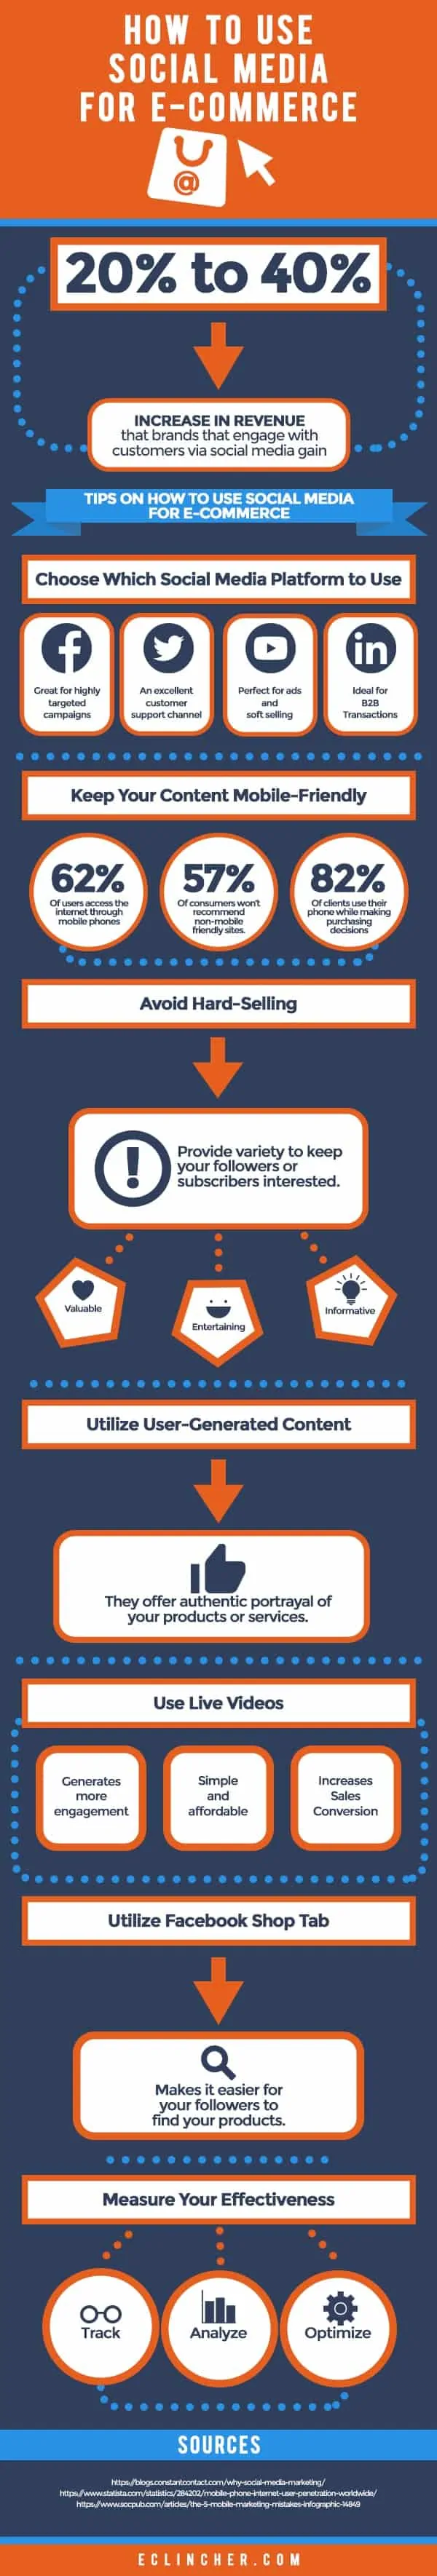 how to use social media for commerce infographic